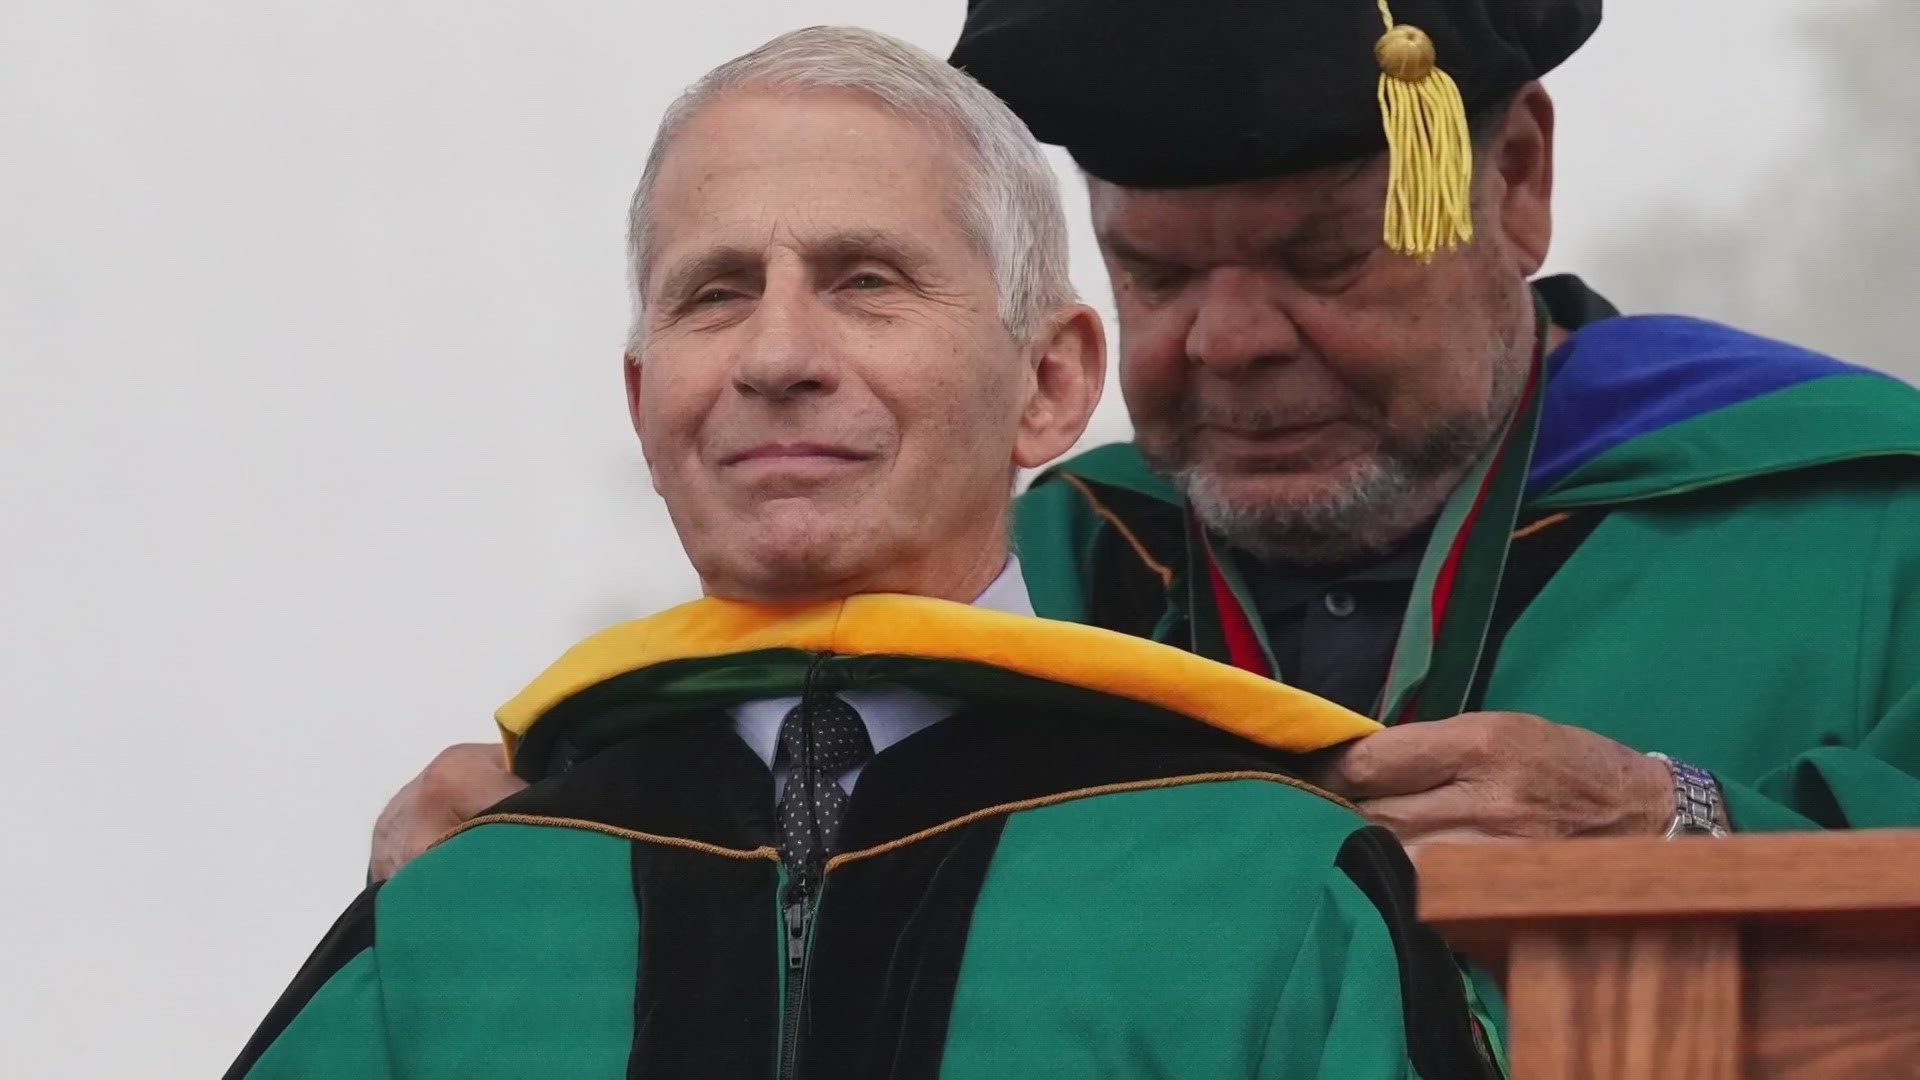 Dr. Anthony Fauci received an honorary doctorate degree from WashU Monday. He spoke to more than 3,000 graduates in the crowd.